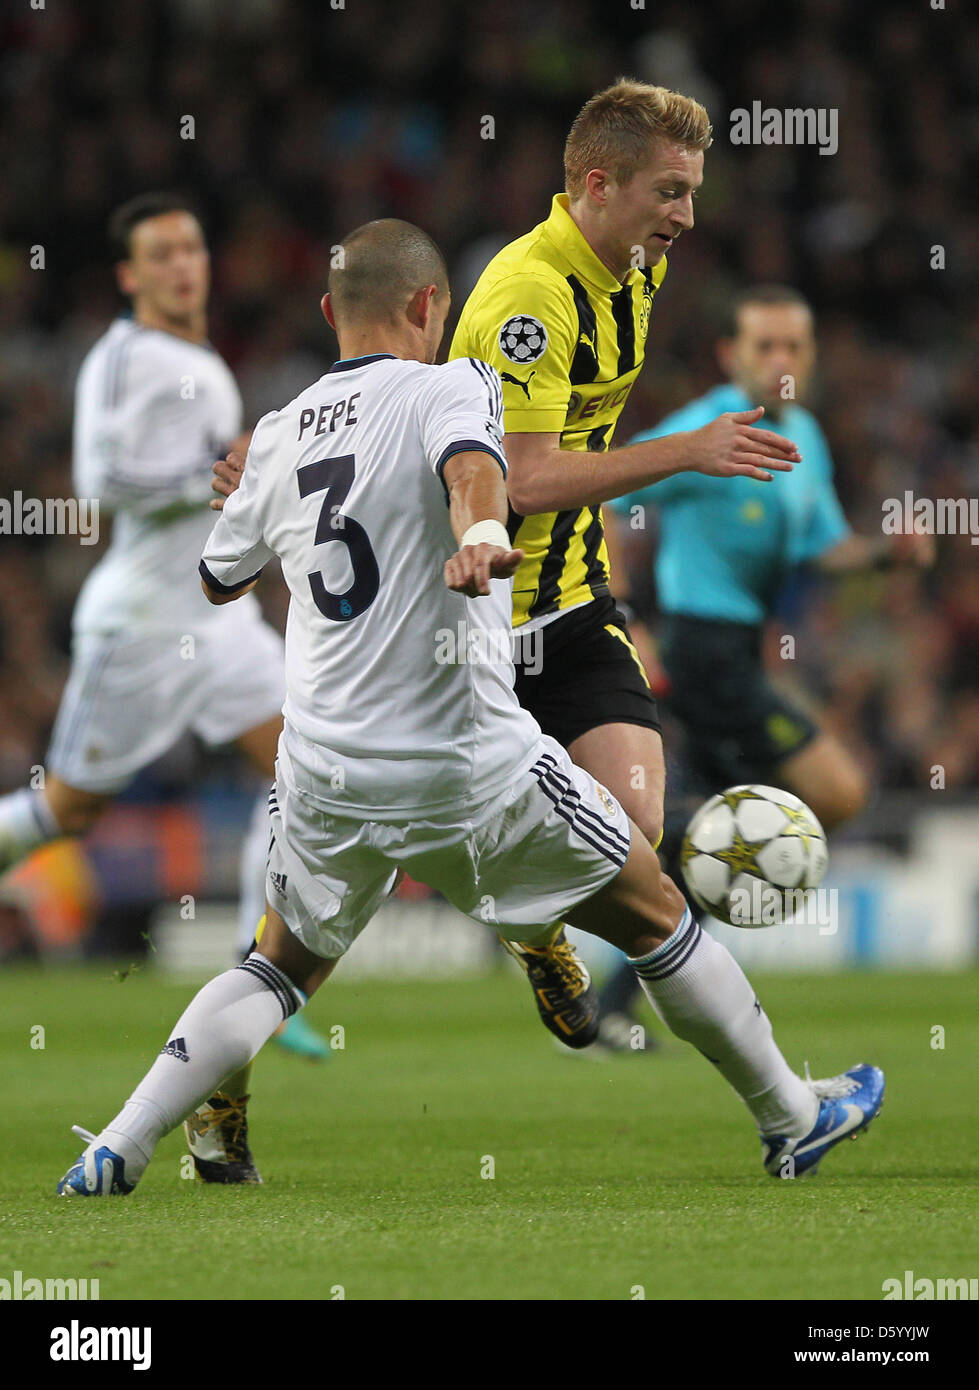 Real Madrid's Pepe (l) fights for the ball with Dortmund's Marco Reus during the Champions League Group D soccer match between Real Madrid and Borussia Dortmund at the Santiago Bernabeu Stadium in Madrid, Spain, 6 November 2012. Photo: Fabian Stratenschulte/dpa  +++(c) dpa - Bildfunk+++ Stock Photo